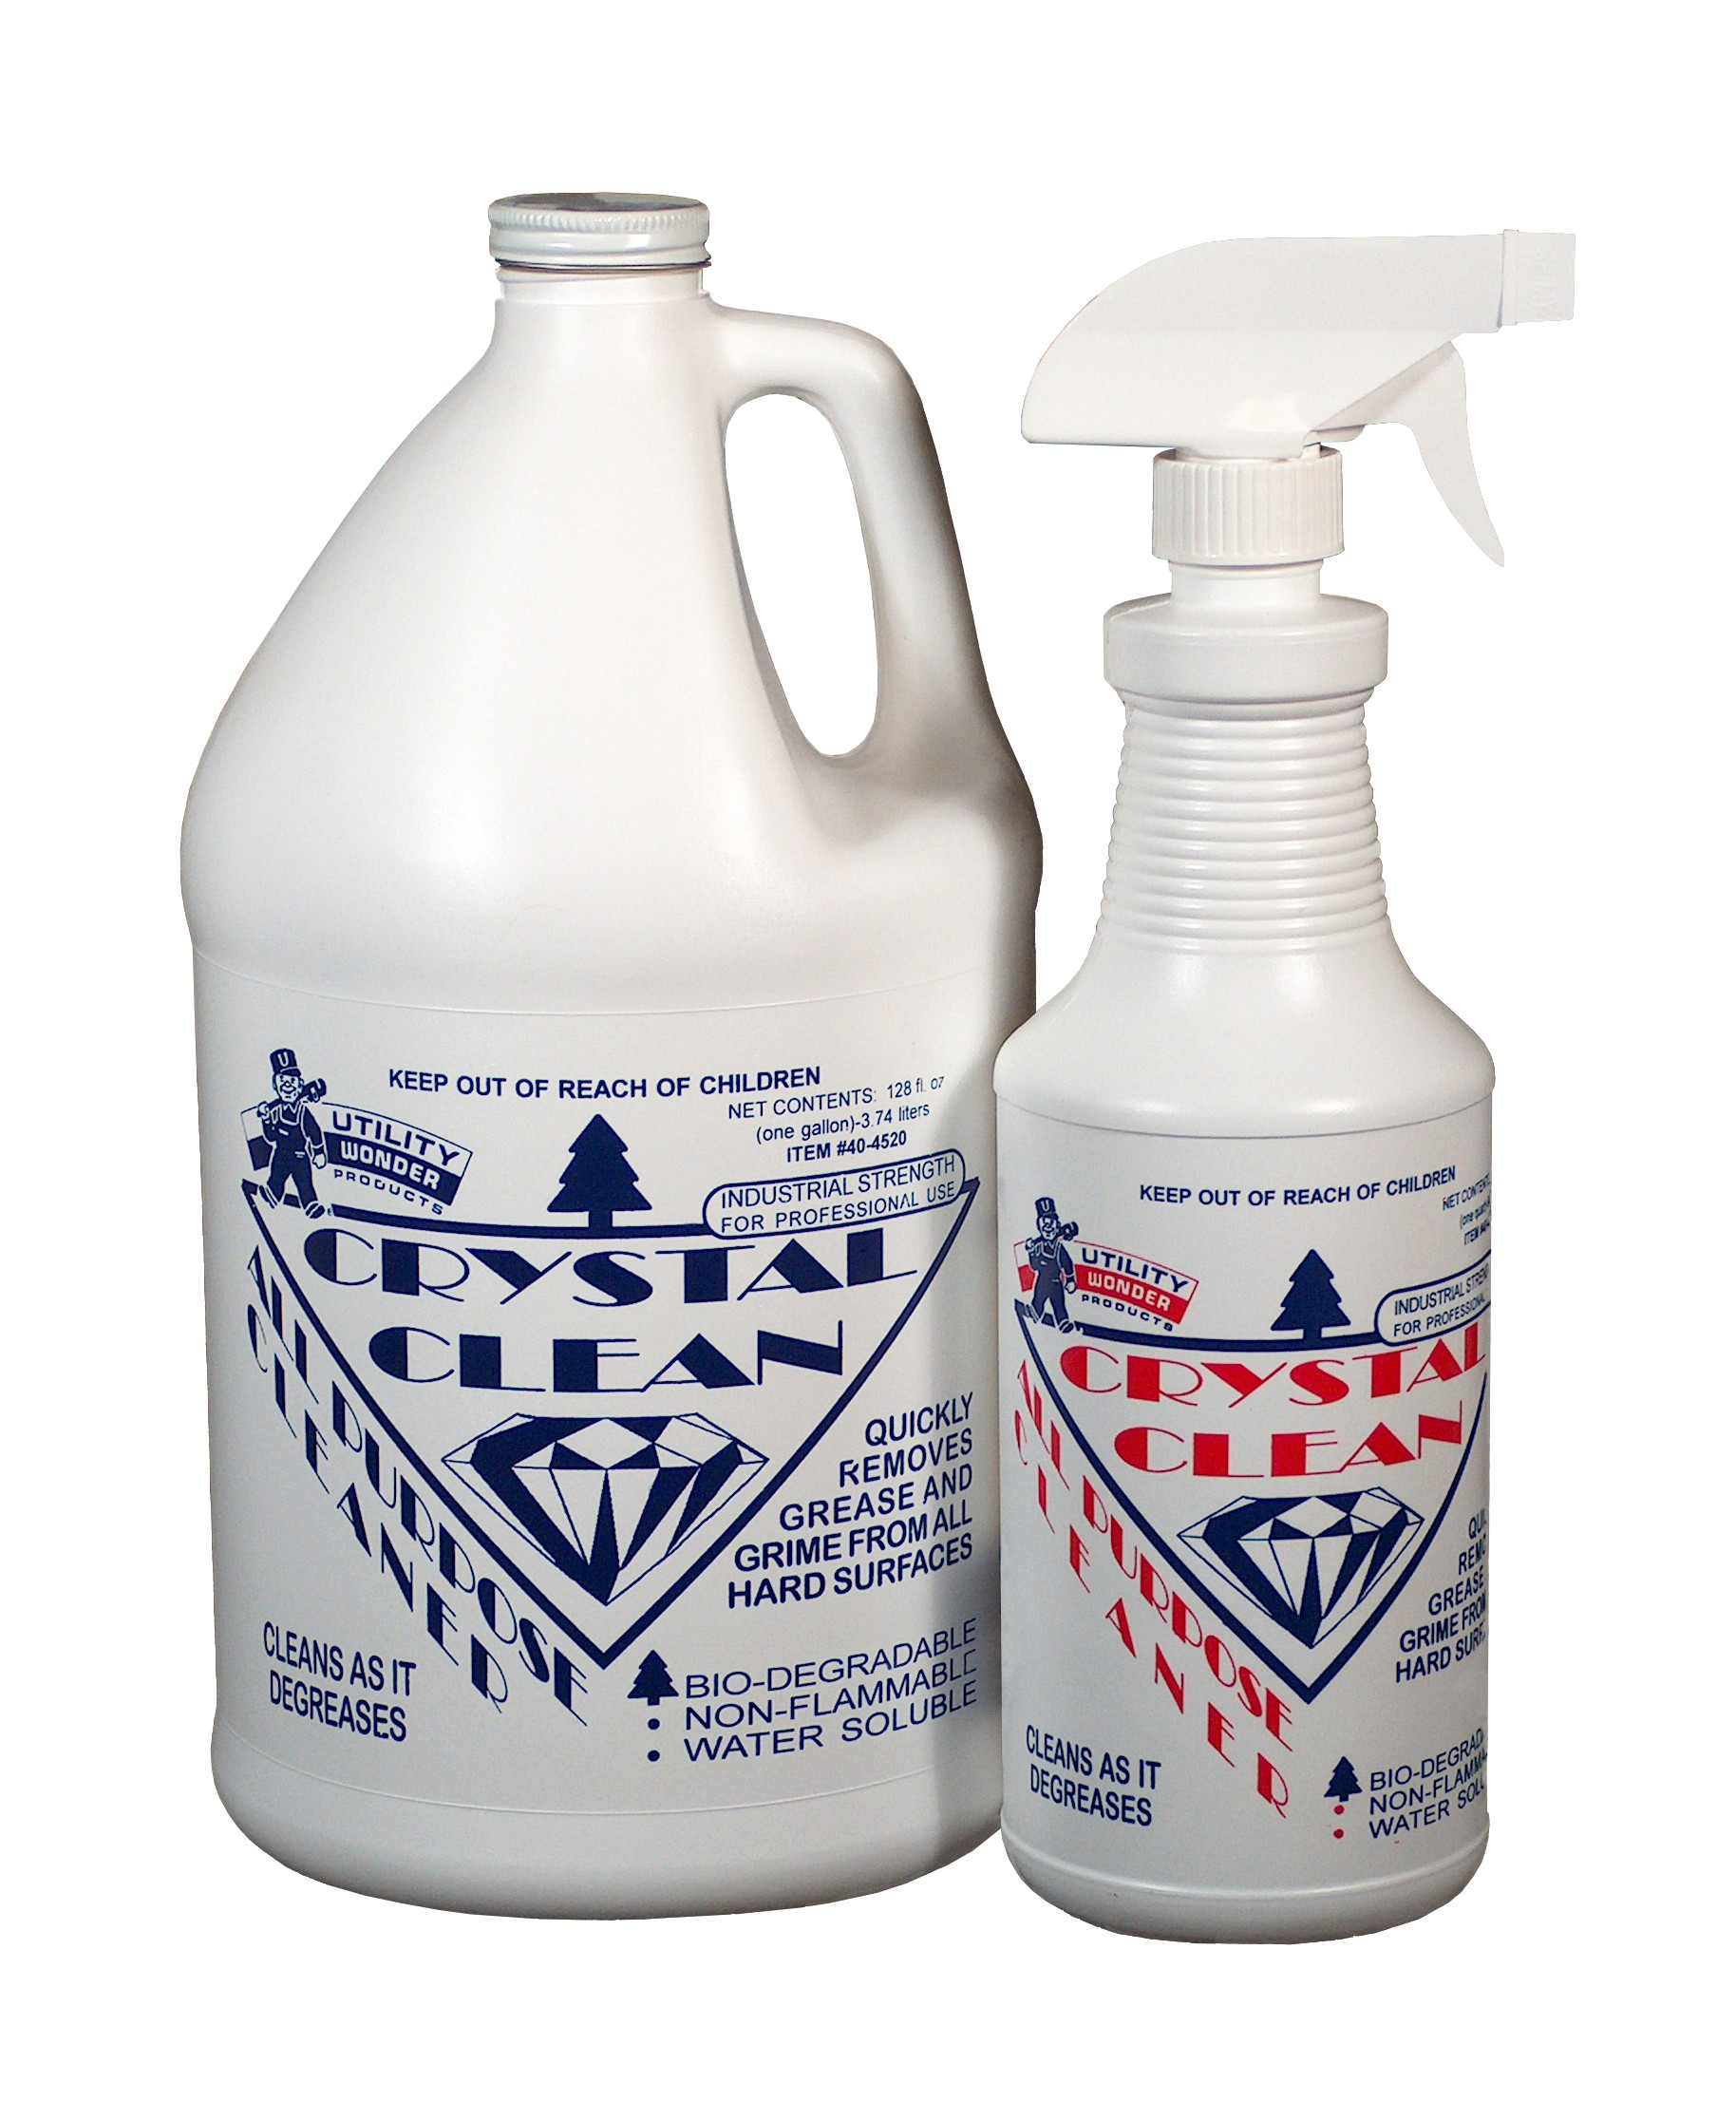 CRYSTAL CLEAN ALL-PURPOSE CLEANER/DEGREASER